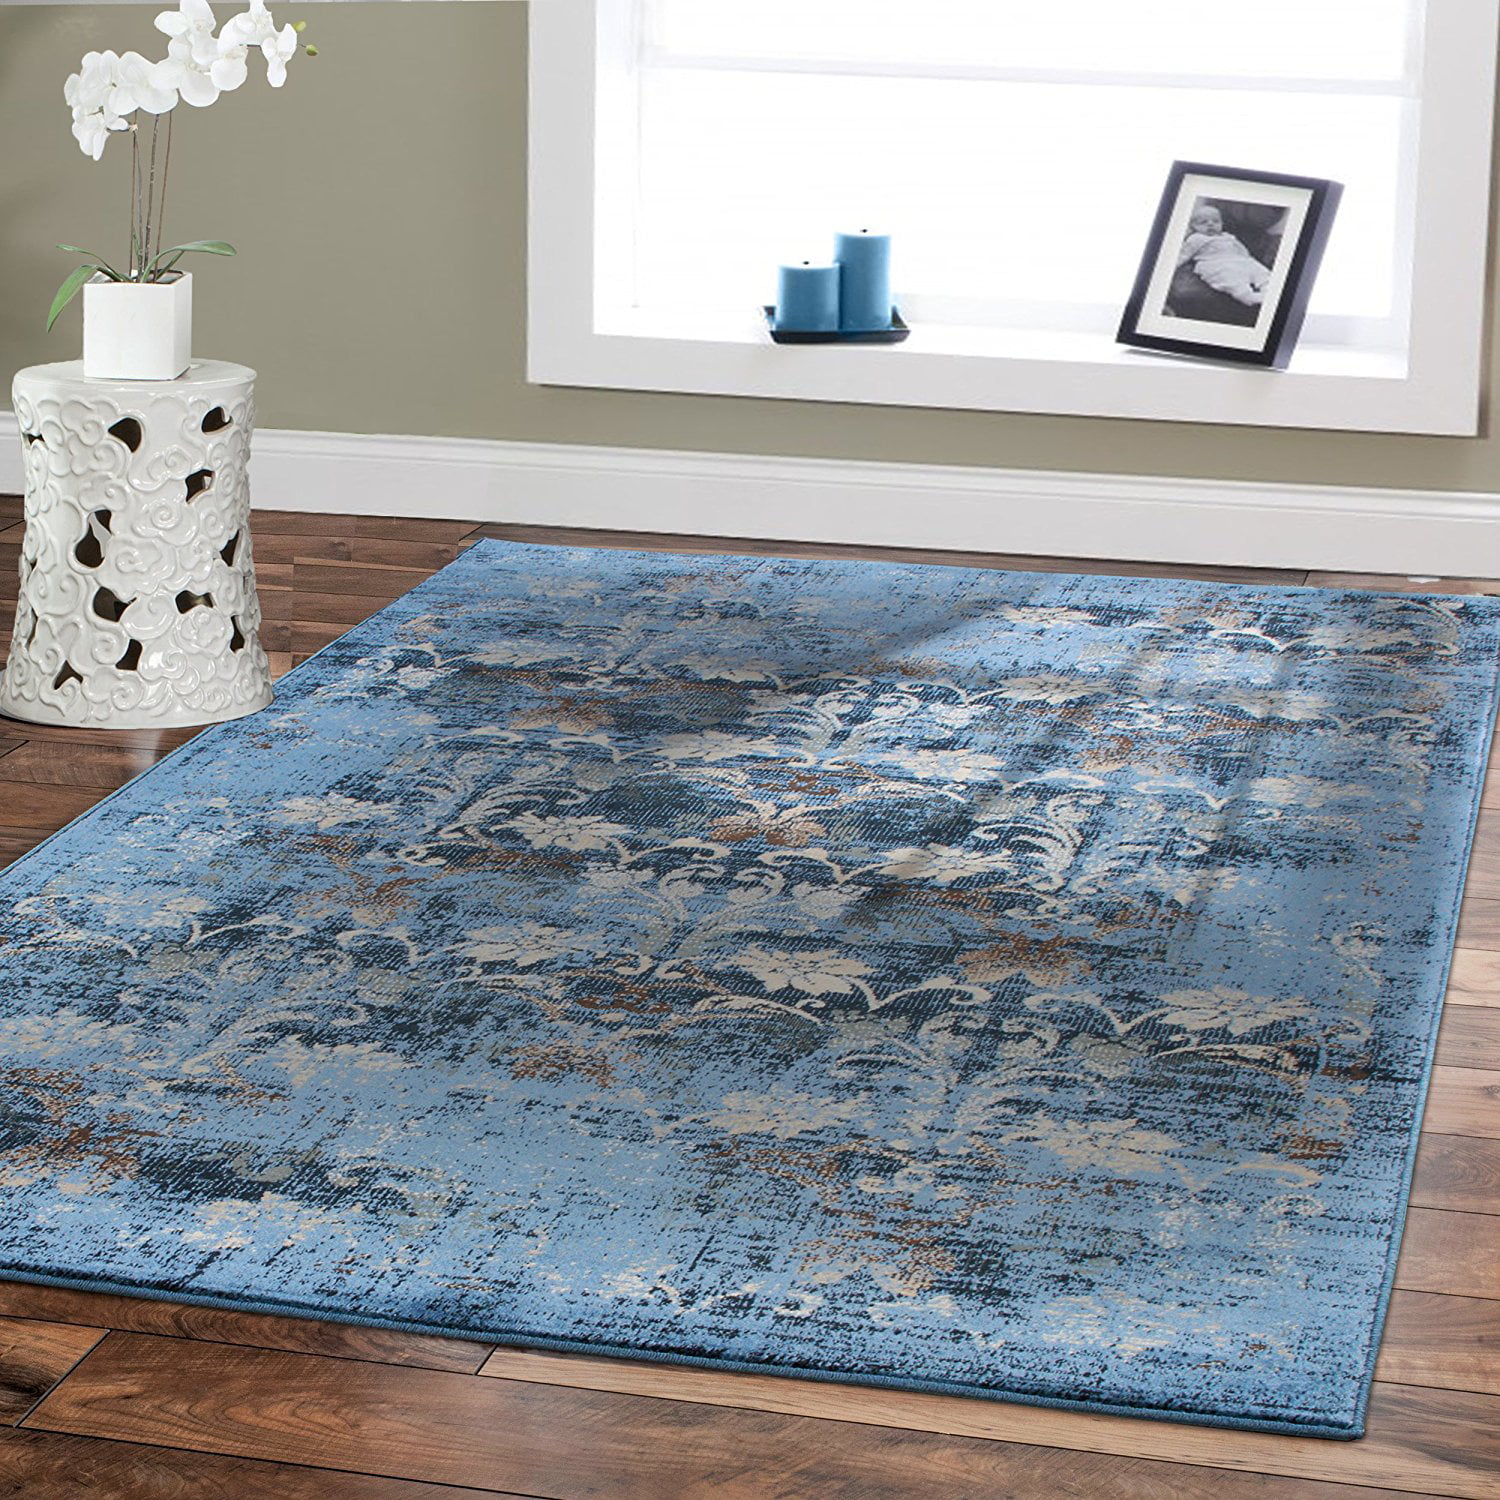 Premium Rugs Large 8x11 Rugs for Living Room 8x10 Area Rugs Under Table